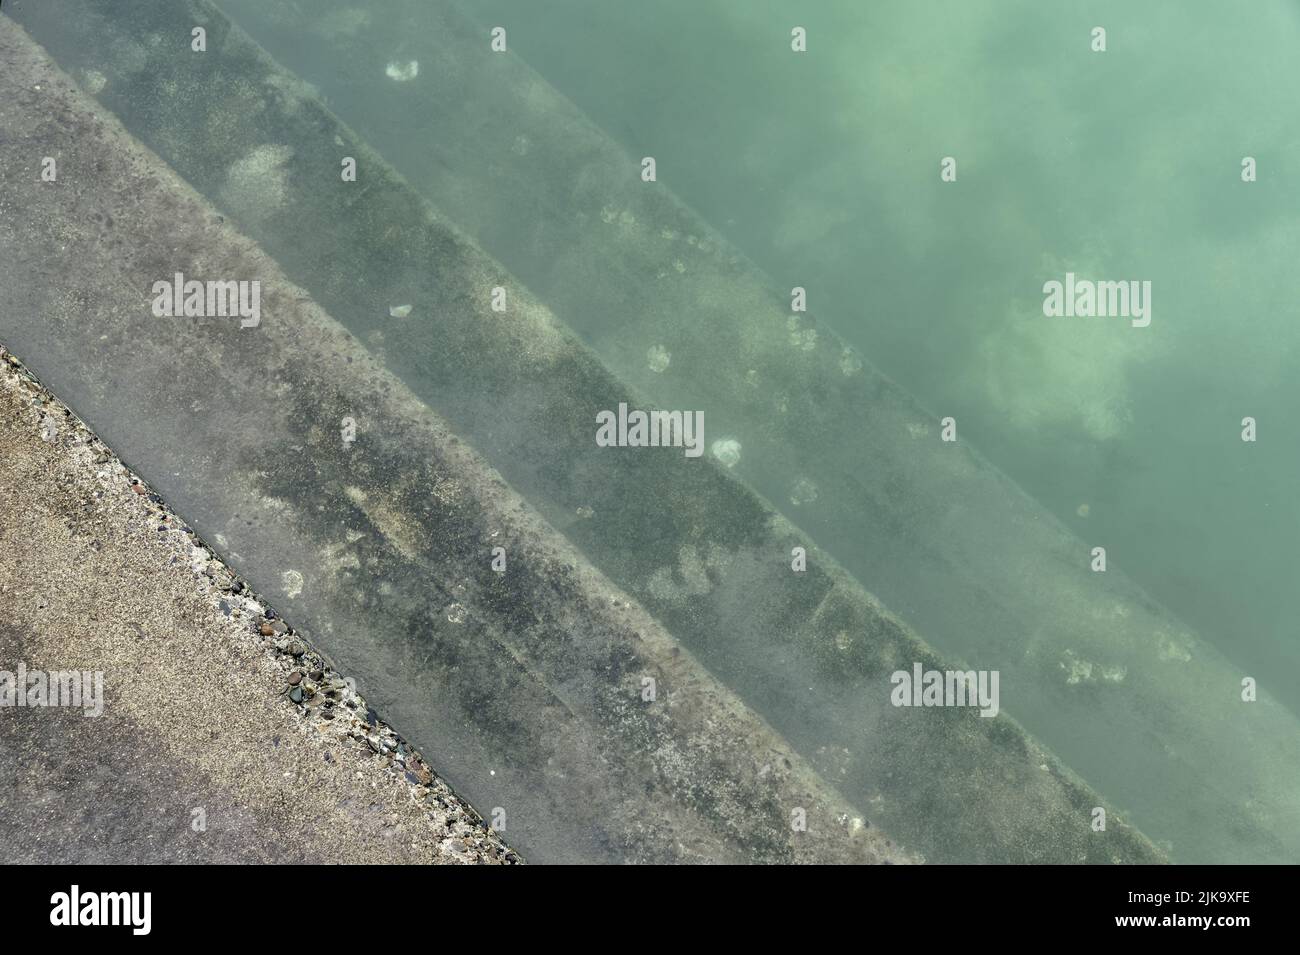 Steps sink into a salt water swimming pool, the water is slightly cloudy Stock Photo